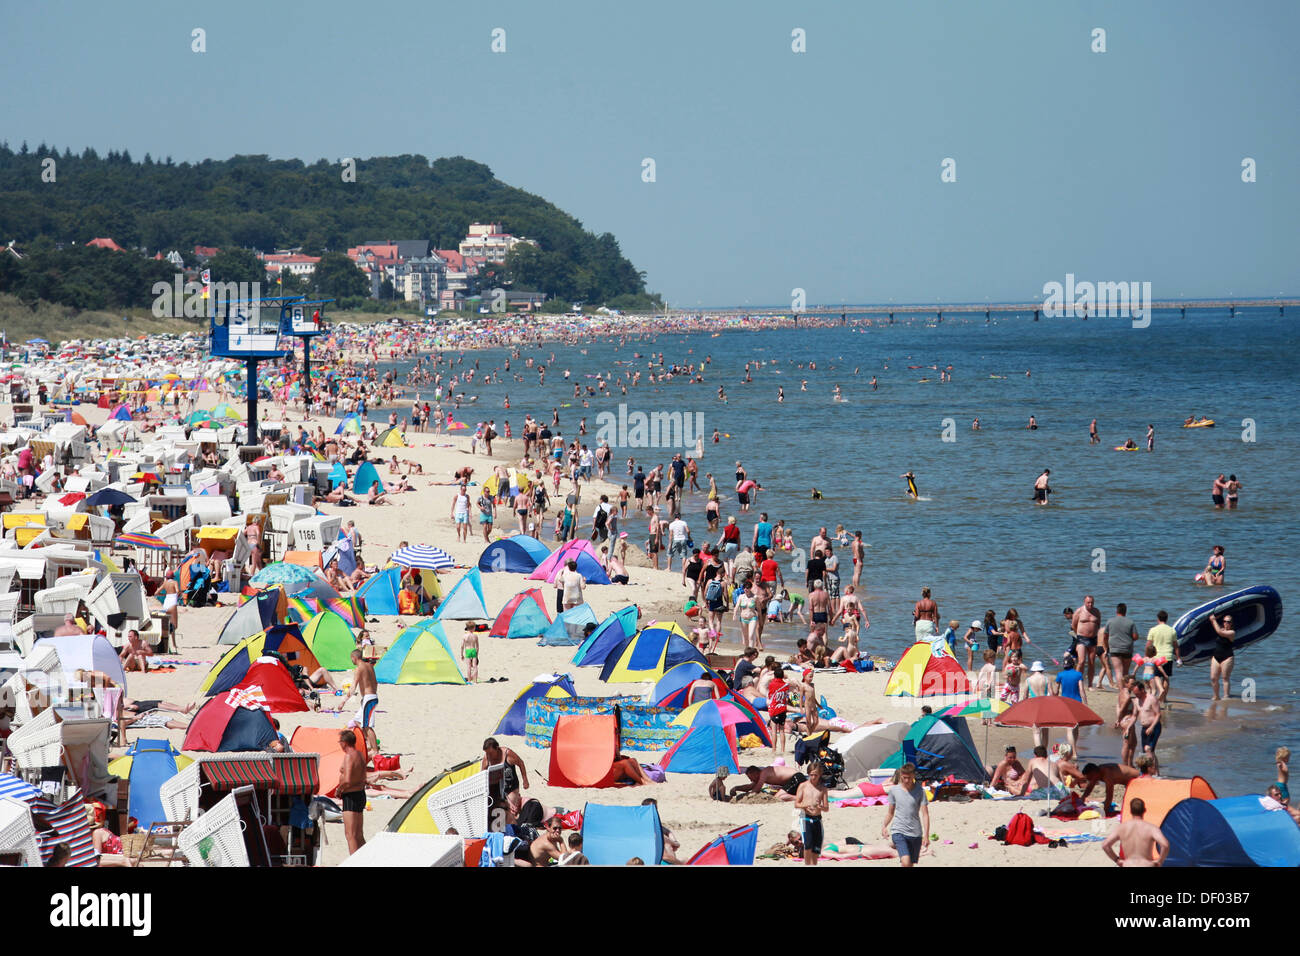 Crowds of people on the beach of the Baltic Sea, Heringsdorf, Mecklenburg-Western Pomerania, Germany Stock Photo